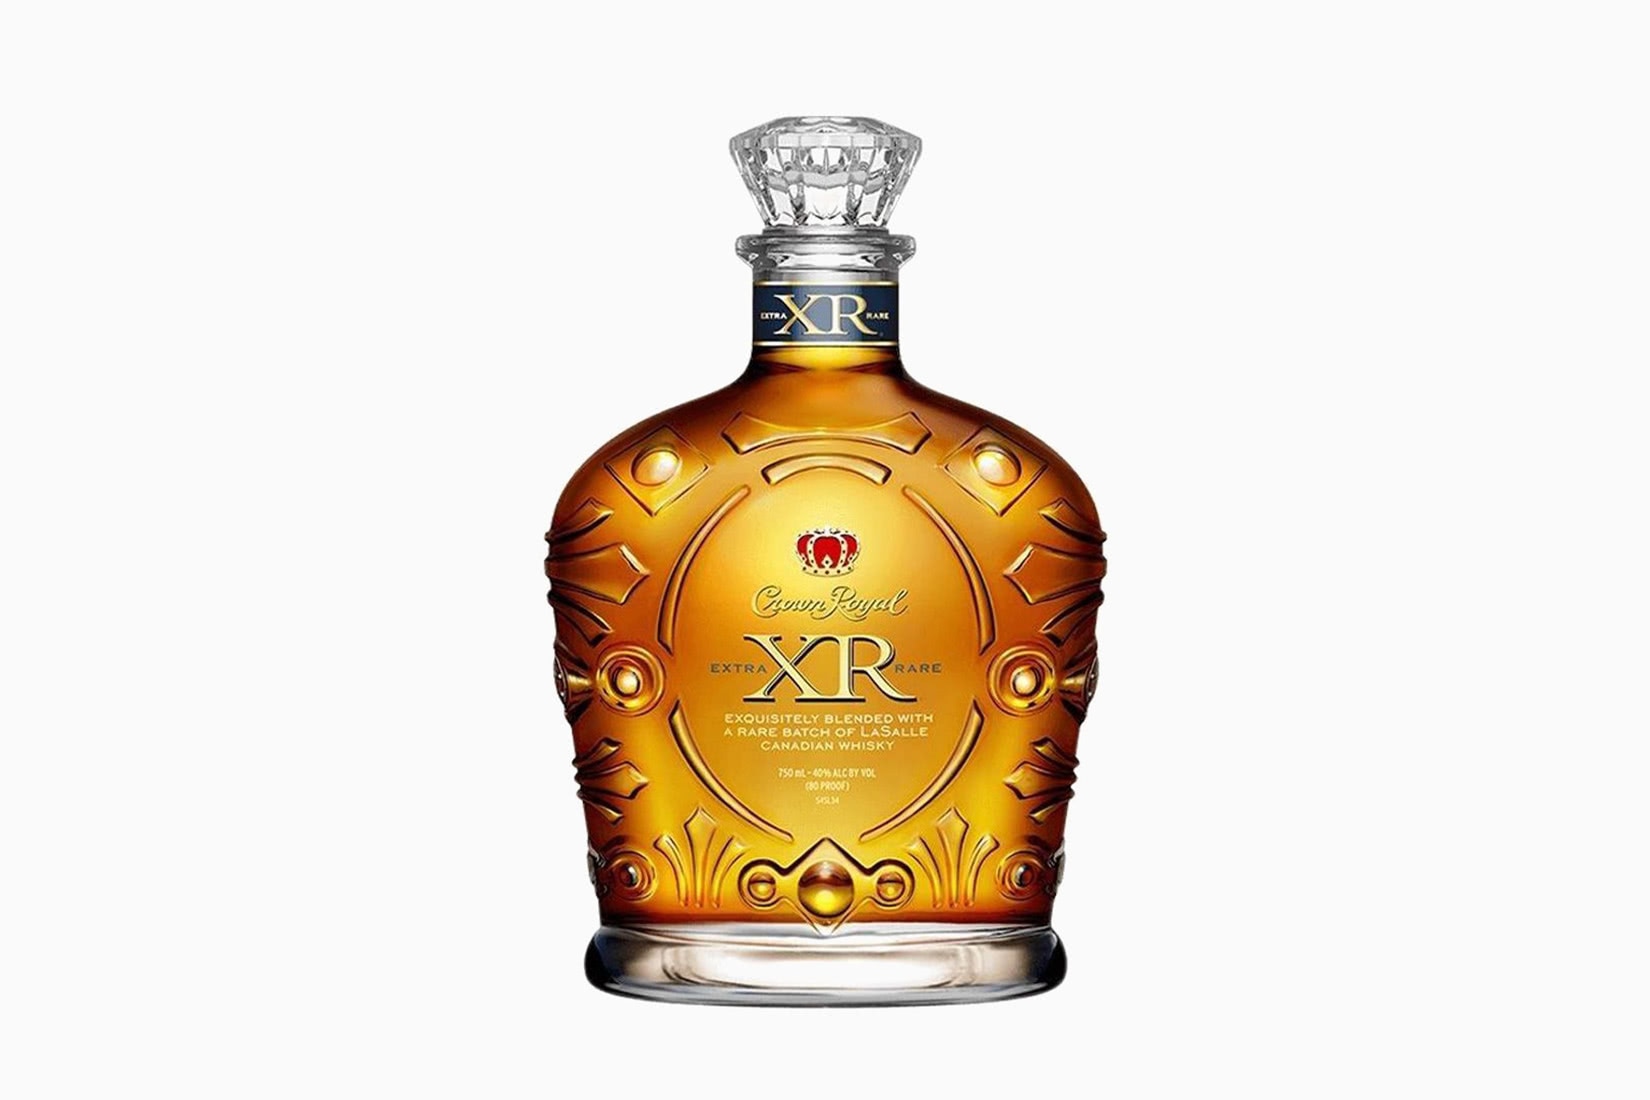 crown royal whisky bottle price size xr - Luxe Digital